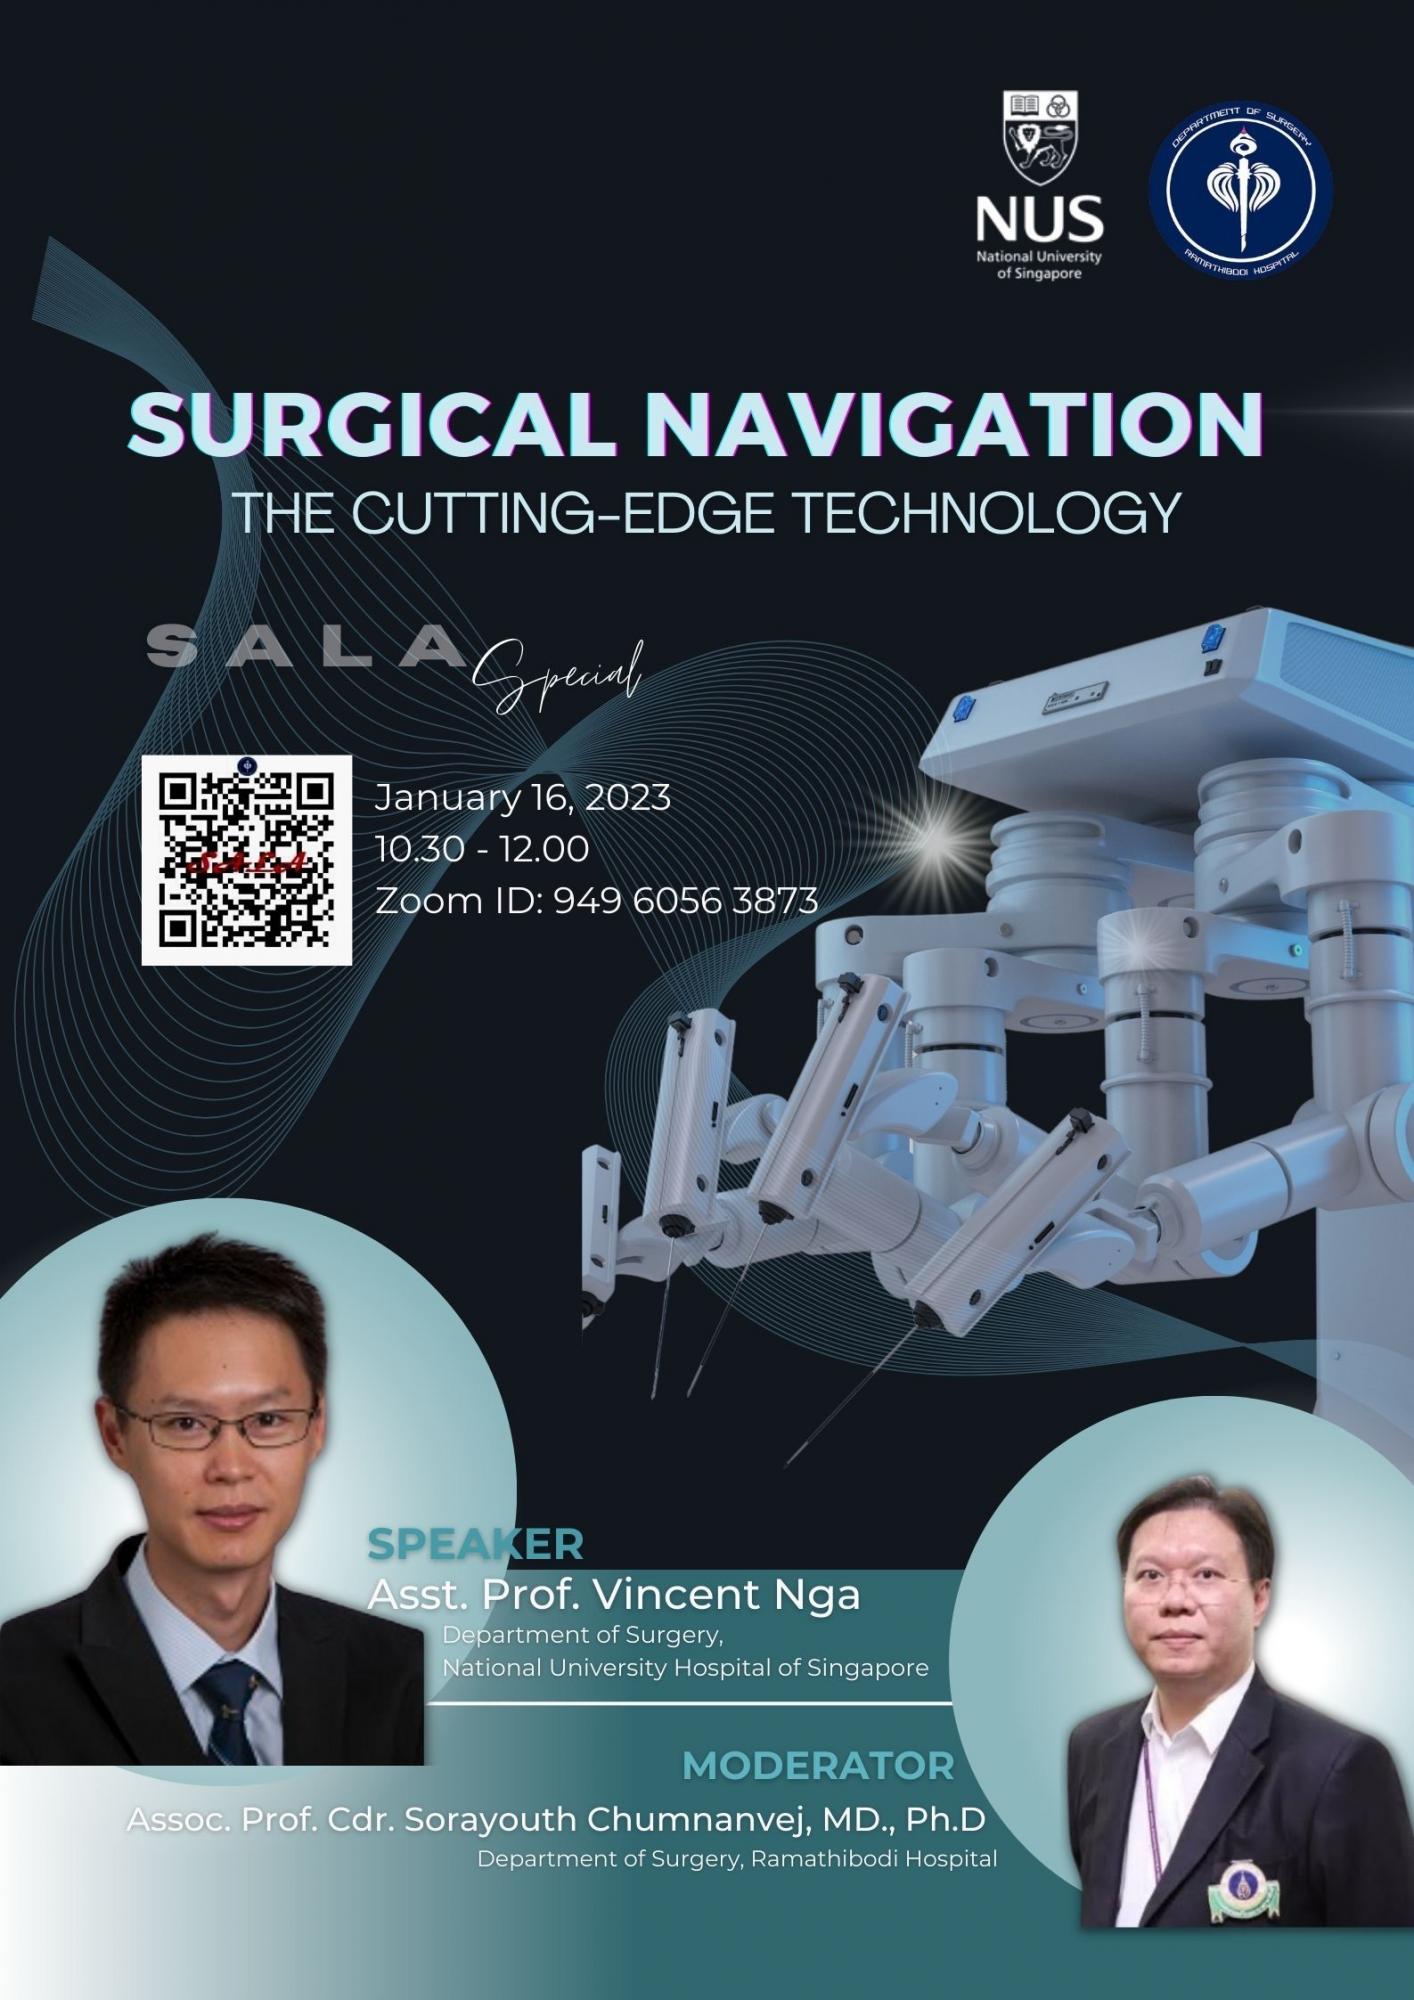 Surgical Navigation System: The Cutting-Edge Technology